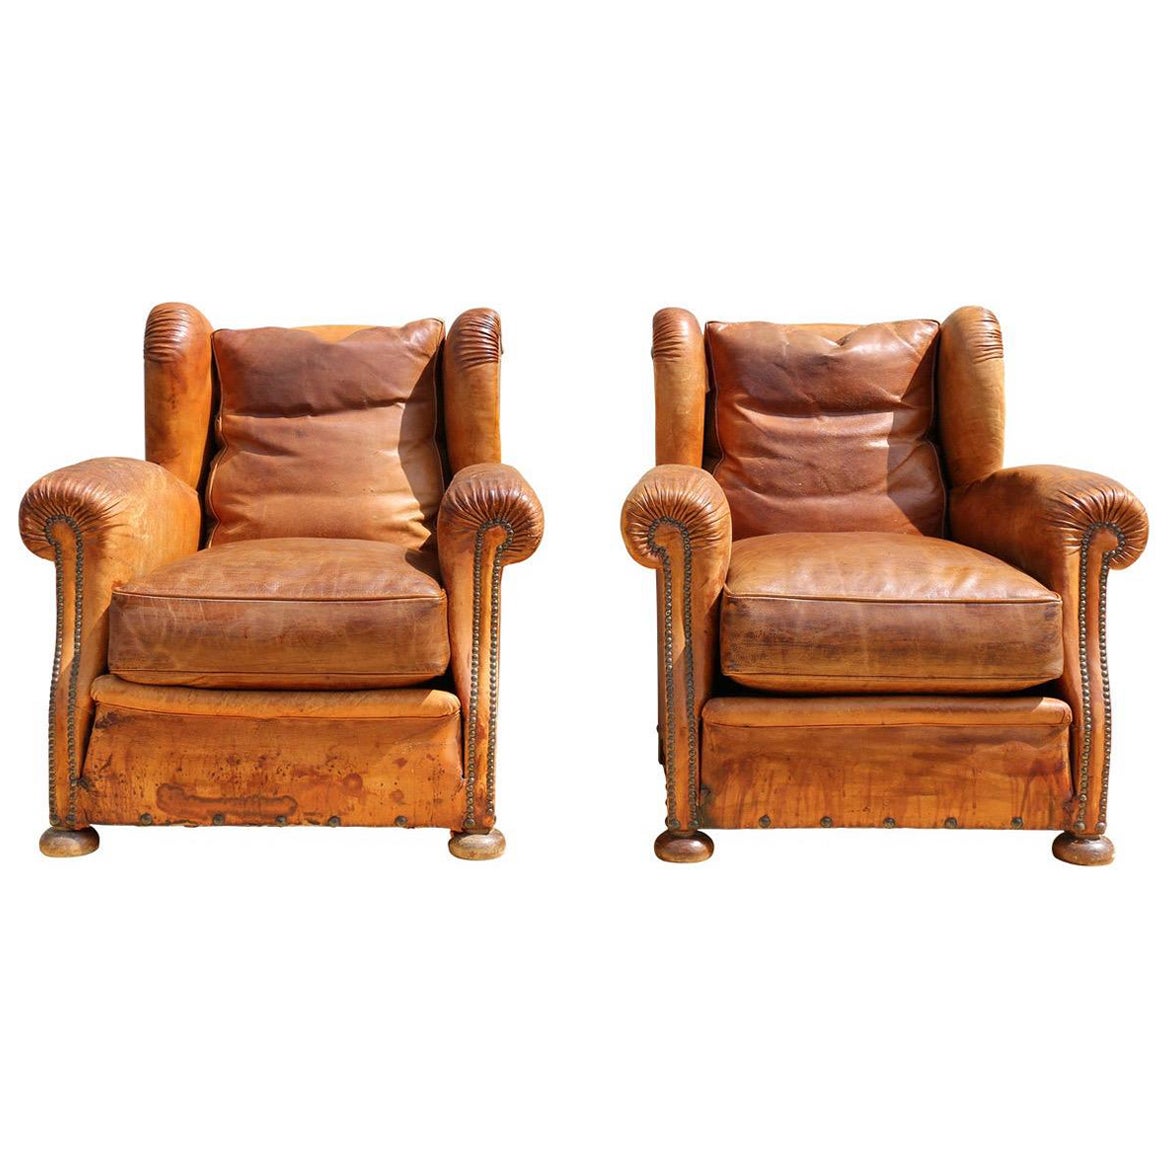 Antique Pair of French Art Deco Distressed Brown Leather Wingback Lounge Chairs For Sale